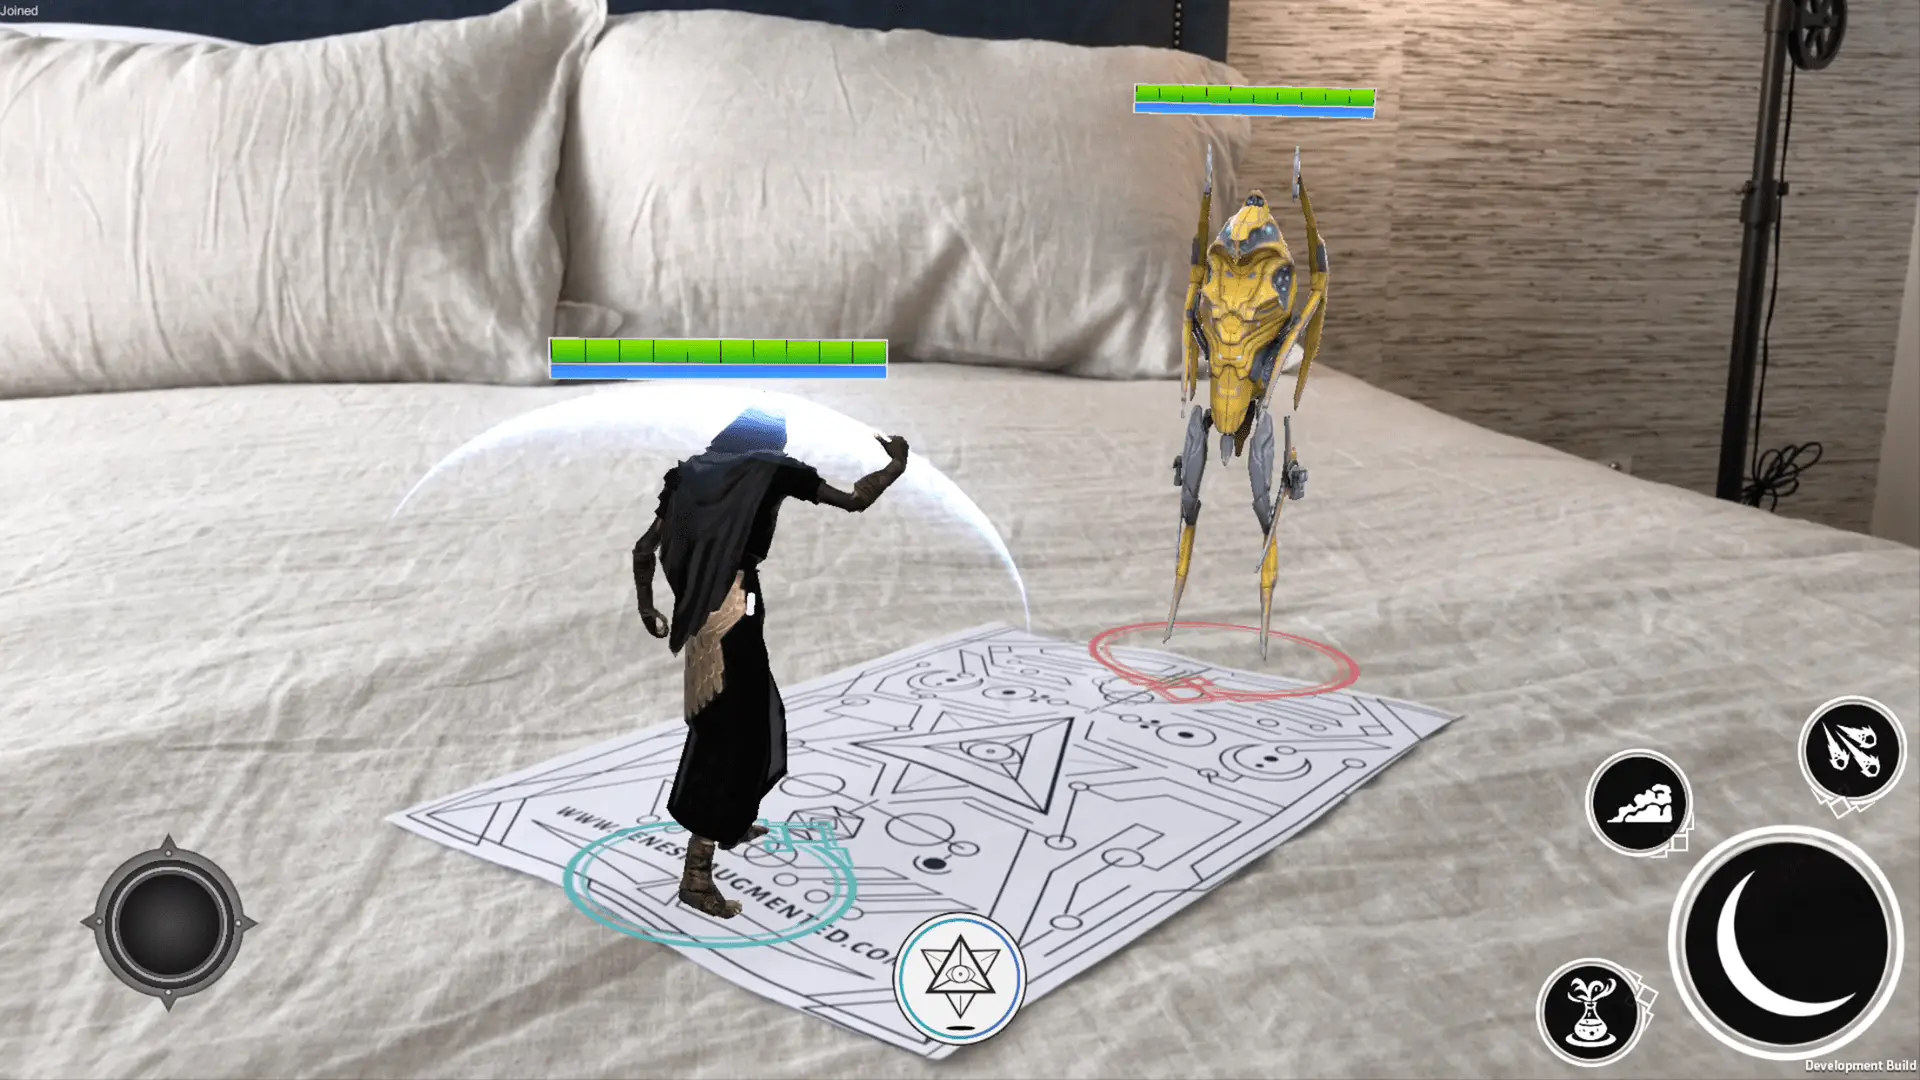 Two characters having a fight from the AR TCG augmented reality mobile game.